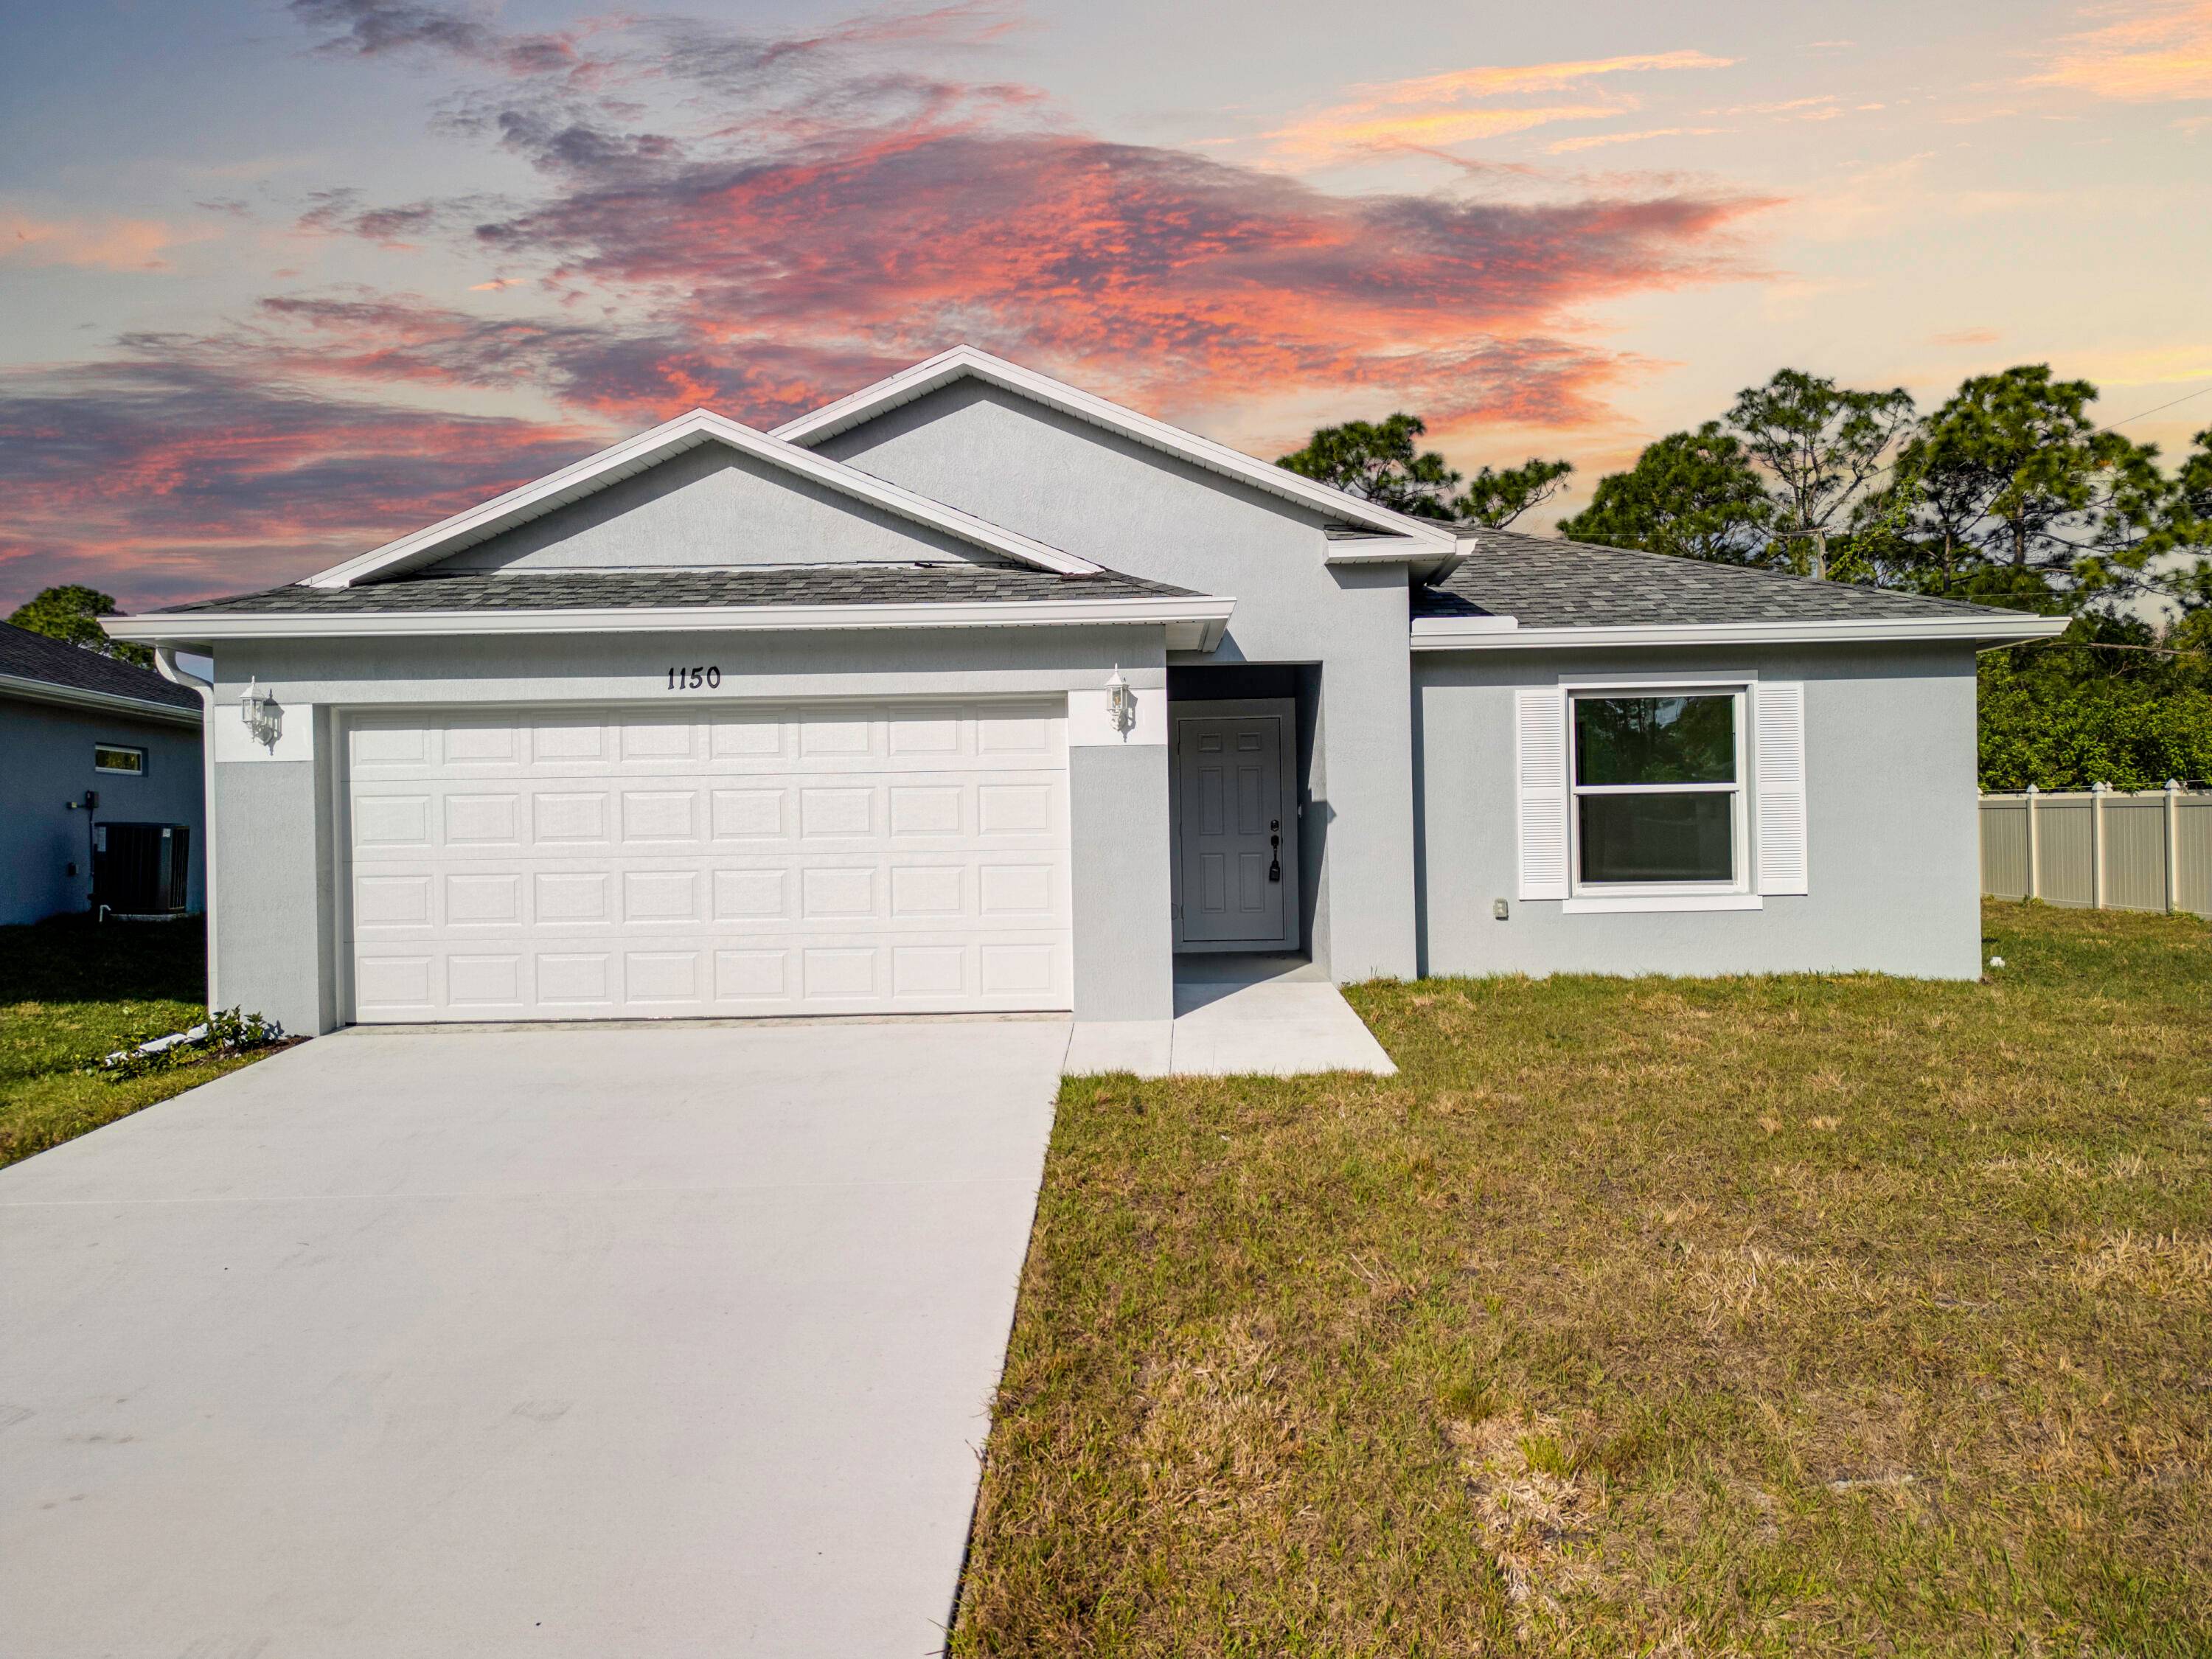 NEW BUILD JUST COMPLETED FEB 20243 BED 2 BATH 2 CAR GARAGE loaded with features impact glass tile throughout granite tops in the kitchen S S appliances walk in pantry ...